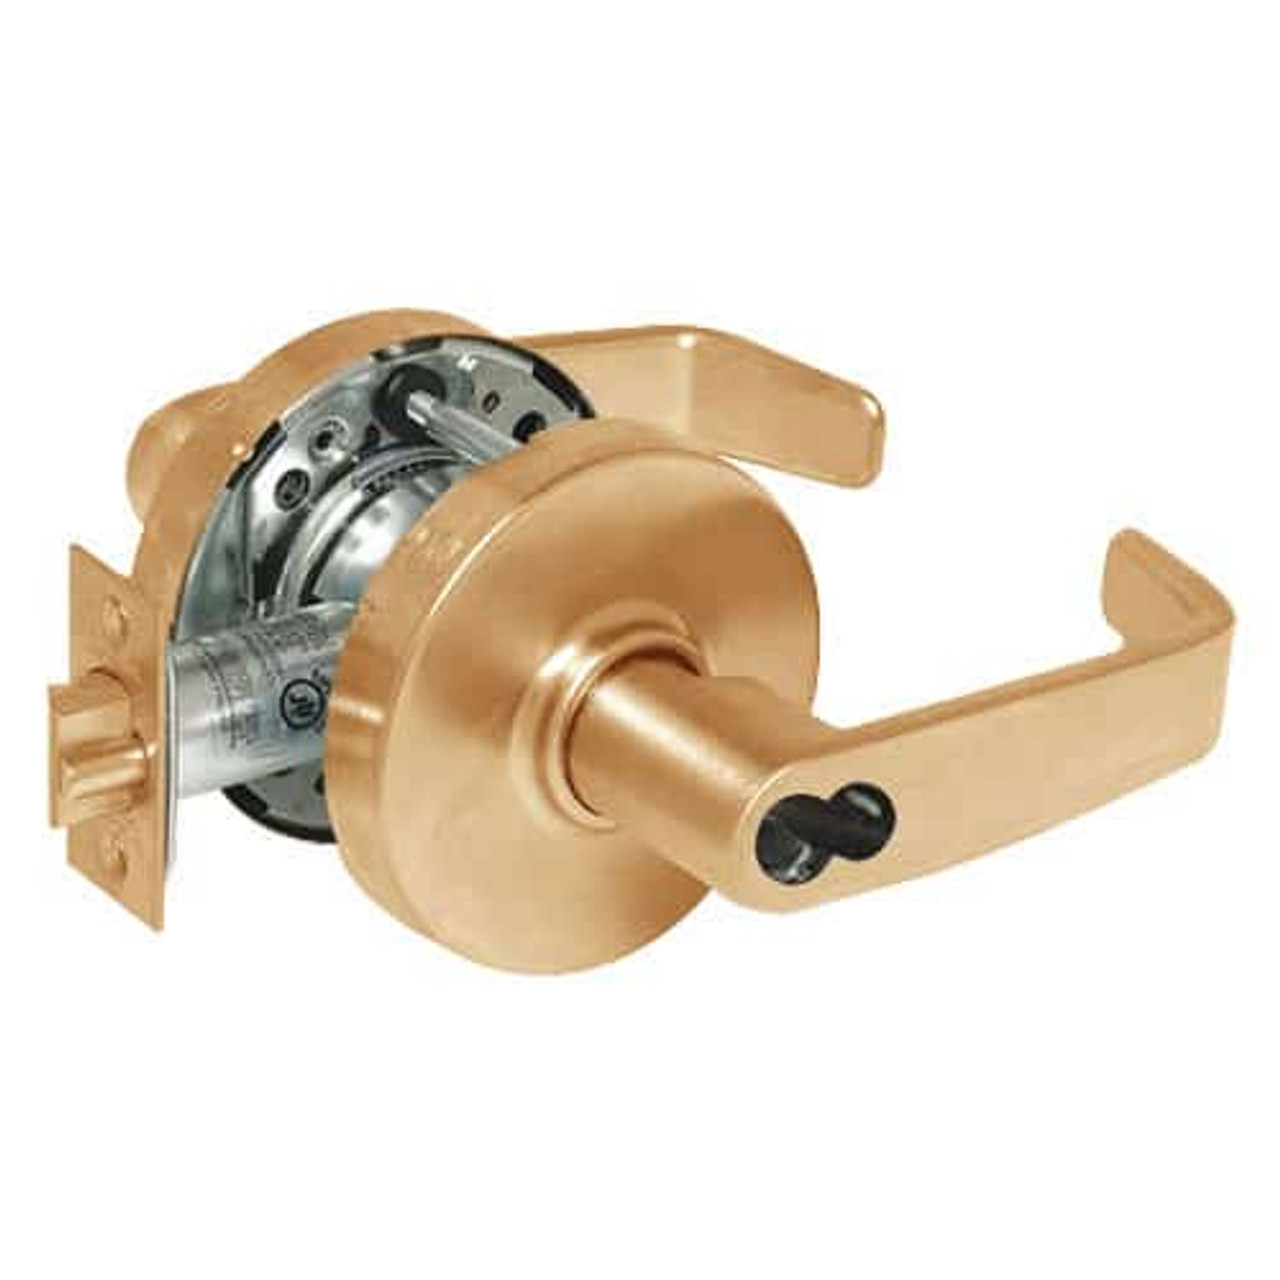 2870-10G37-LL-10 Sargent 10 Line Cylindrical Classroom Locks with L Lever Design and L Rose Prepped for SFIC in Dull Bronze